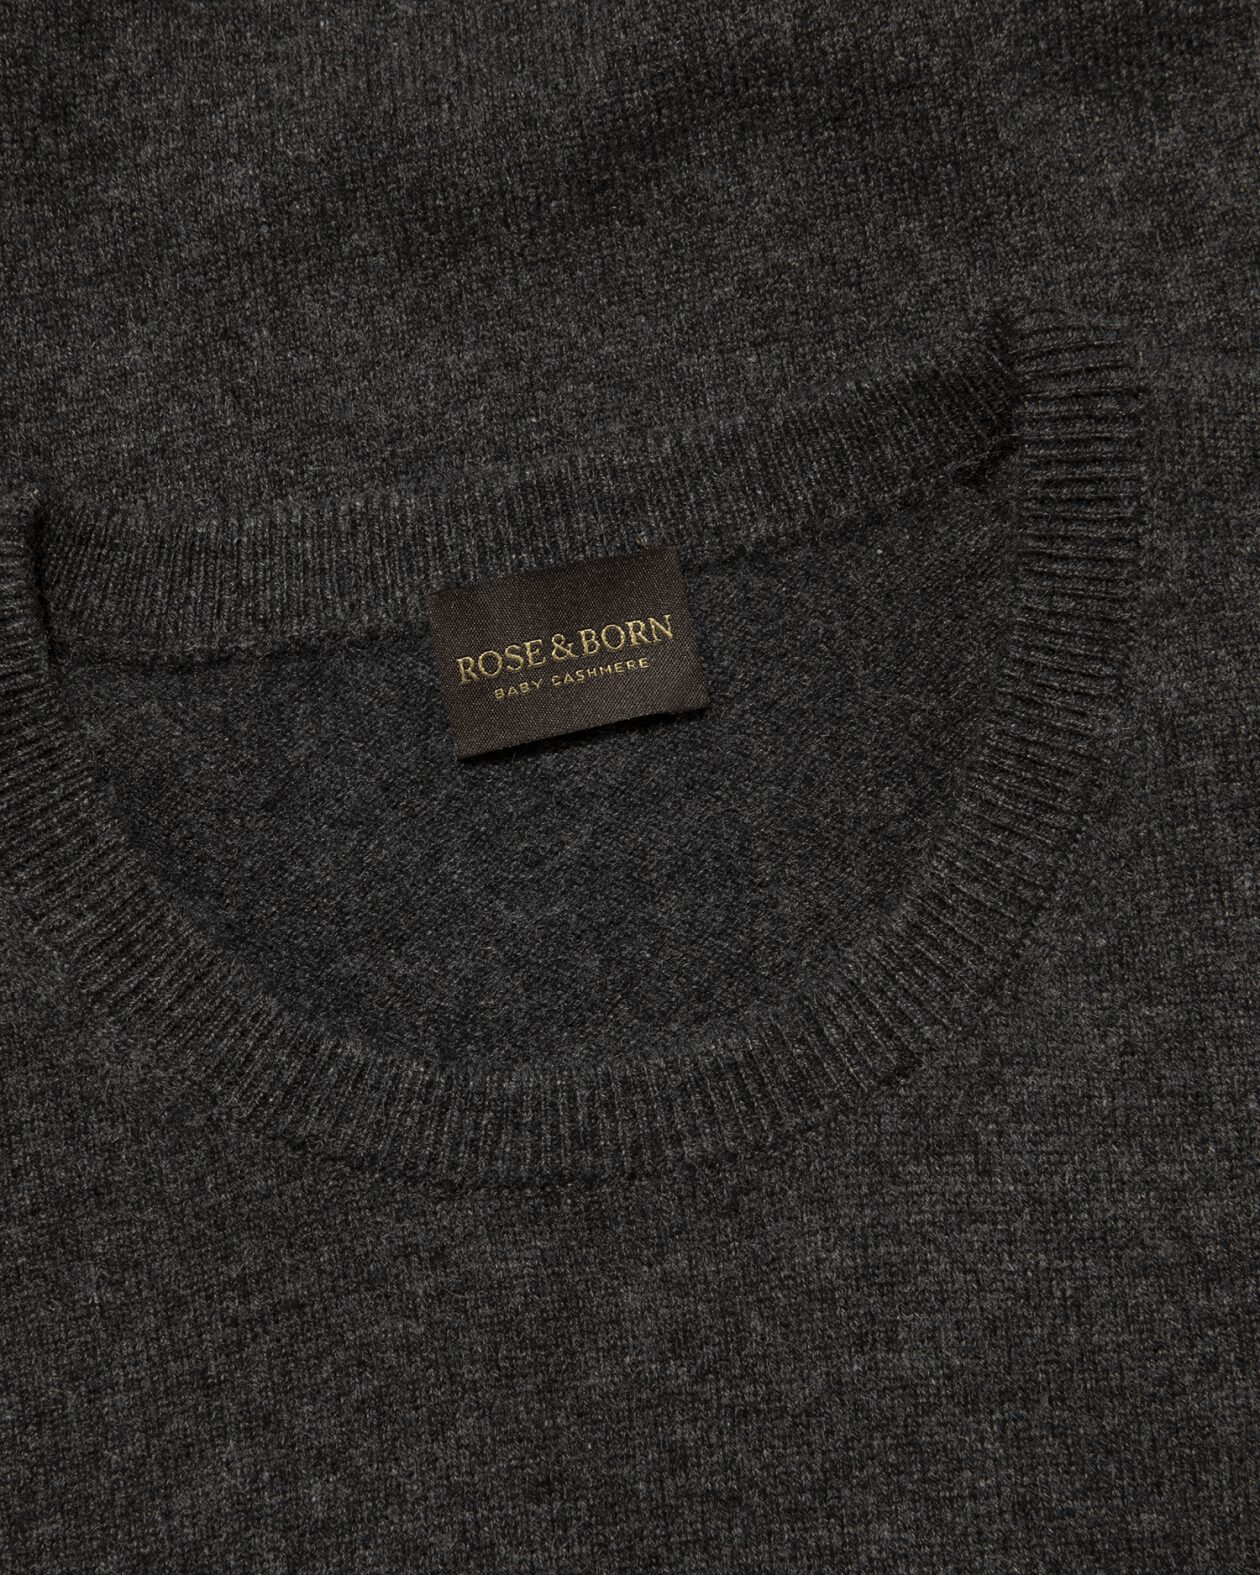 Charcoal Baby Cashmere Crew Neck Sweater